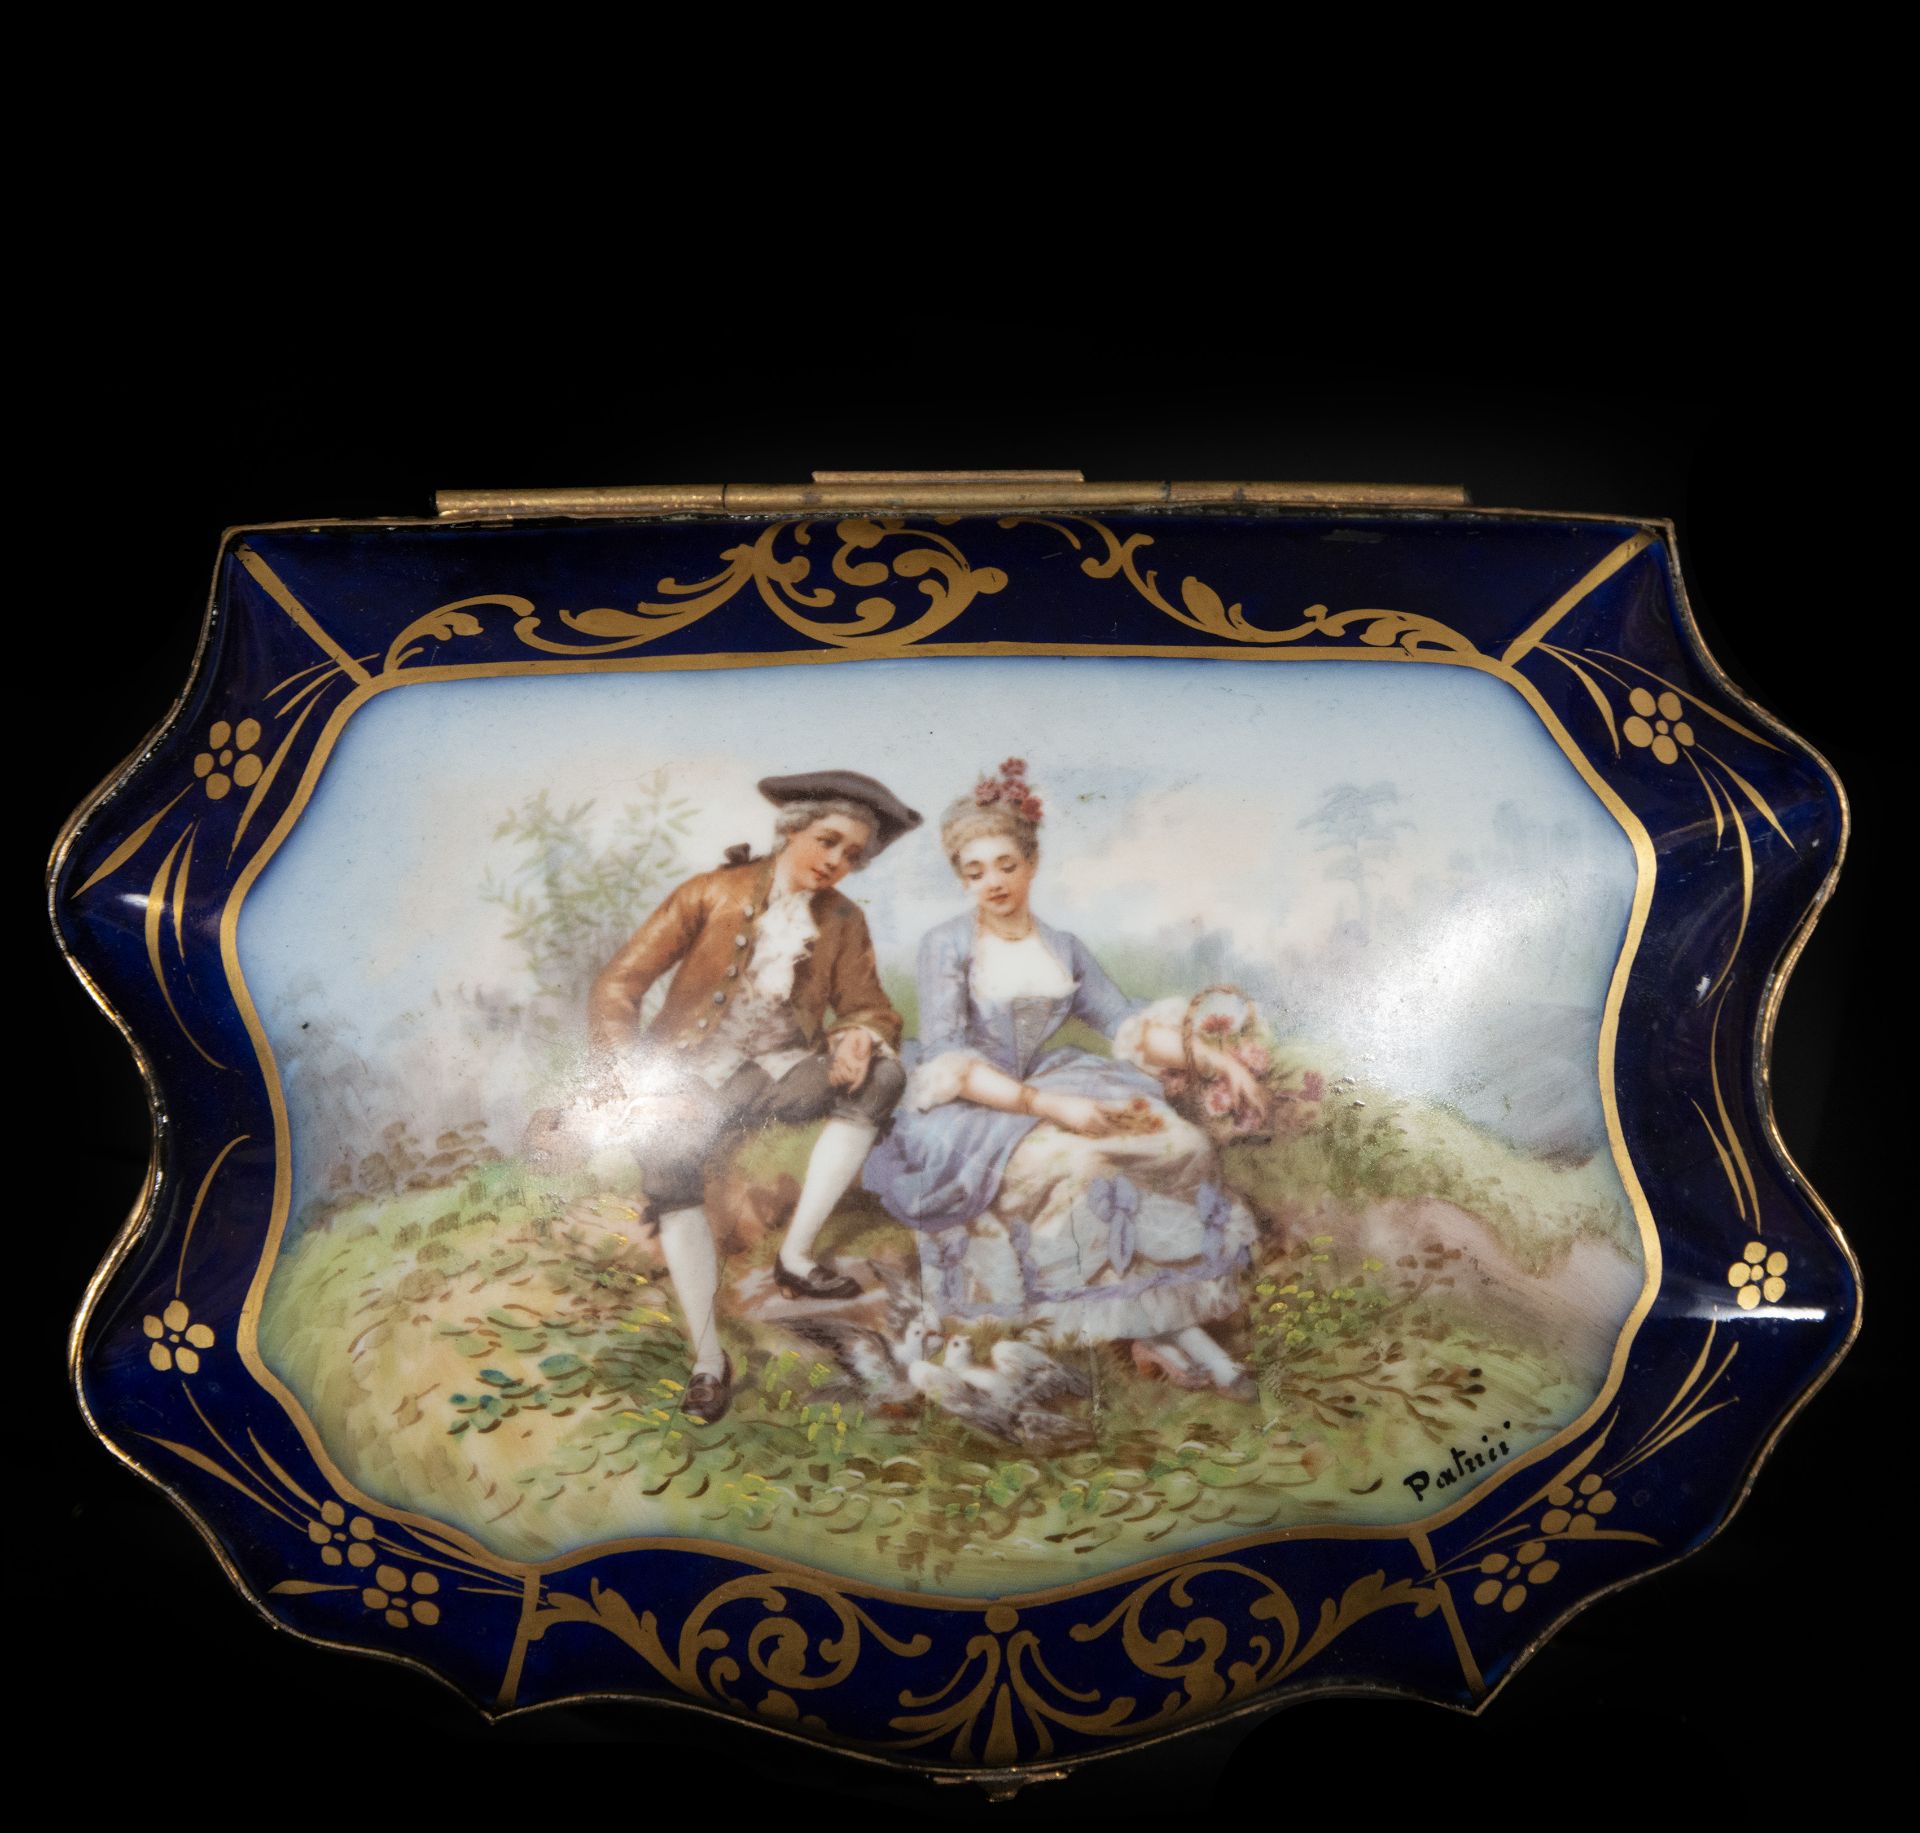 Box in French Sèvres porcelain from the 19th - 20th century - Image 2 of 4